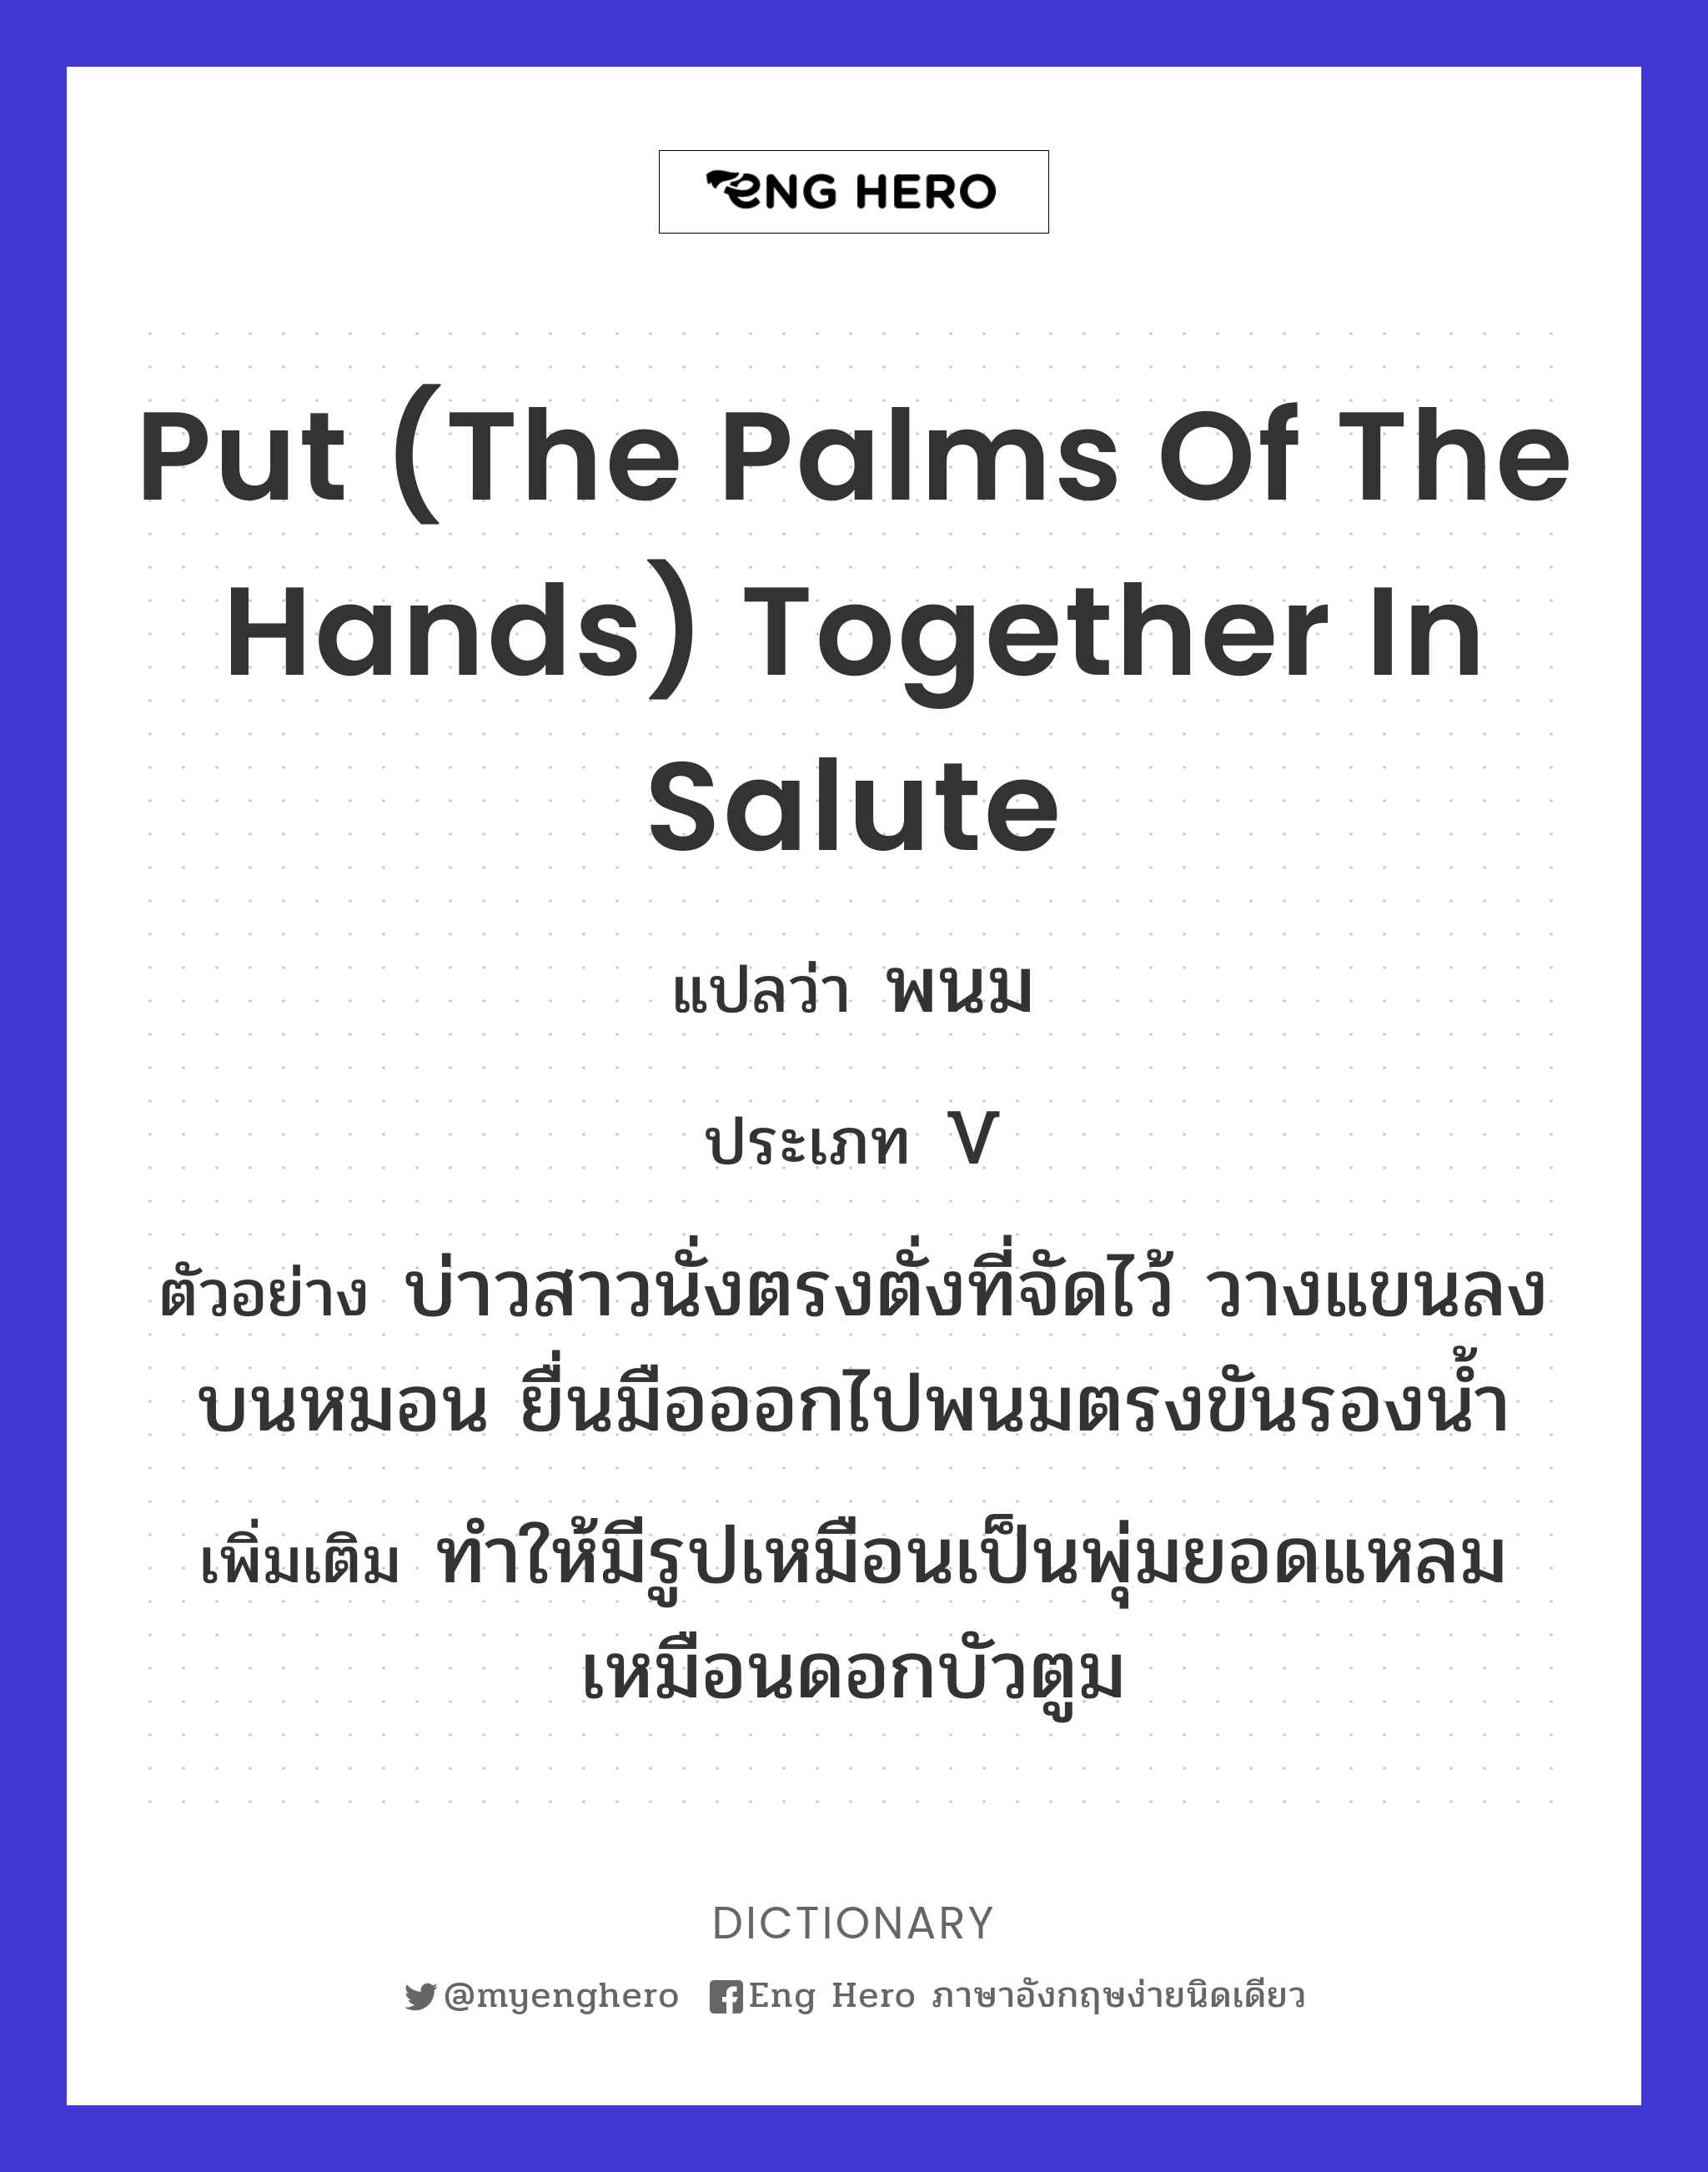 put (the palms of the hands) together in salute